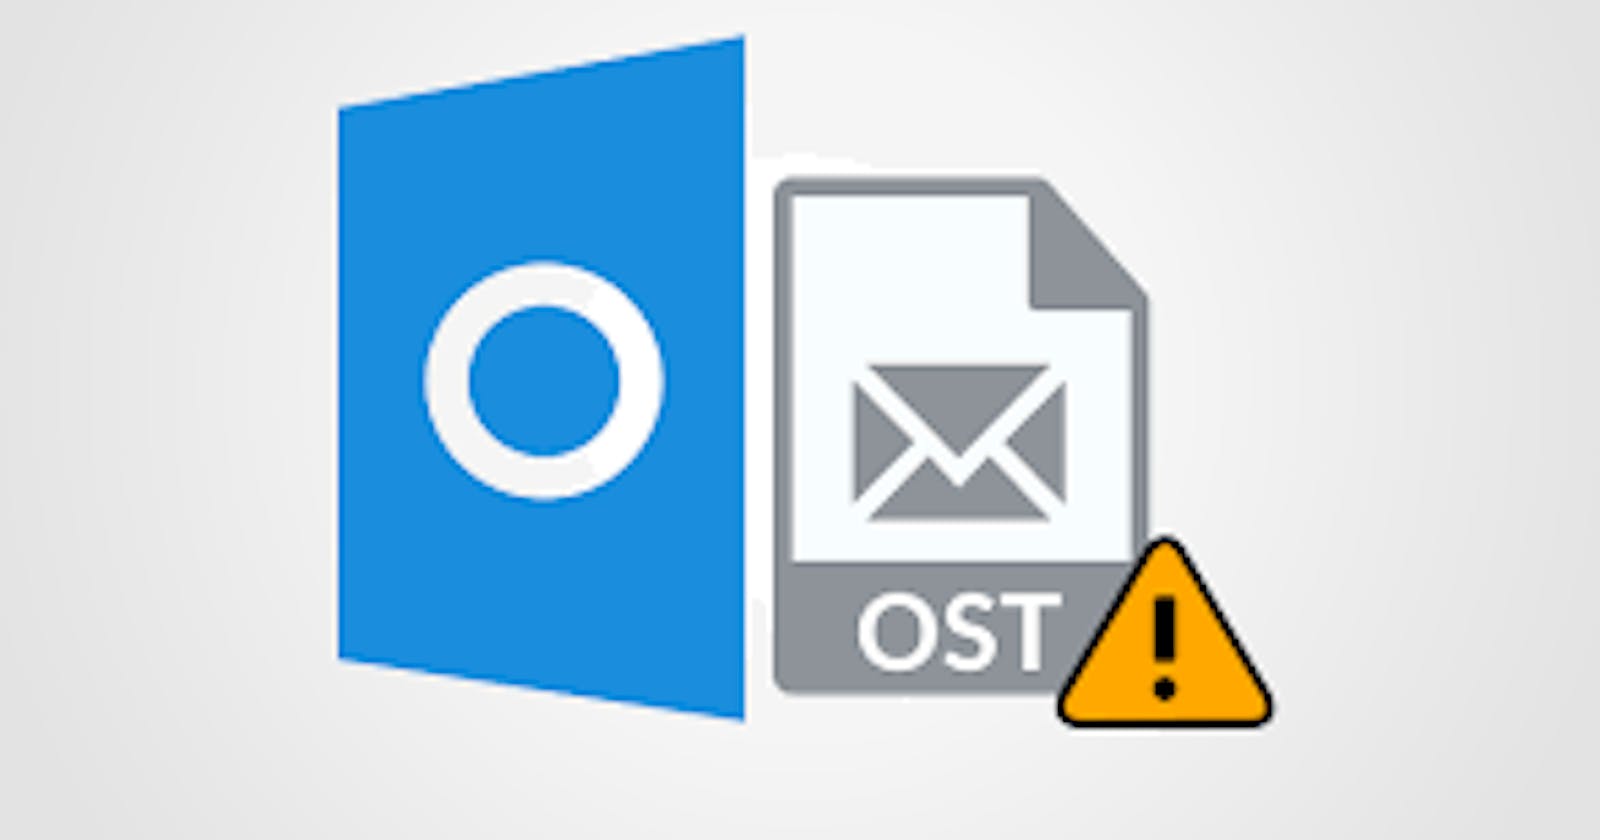 How do I backup Email in Outlook on Windows?